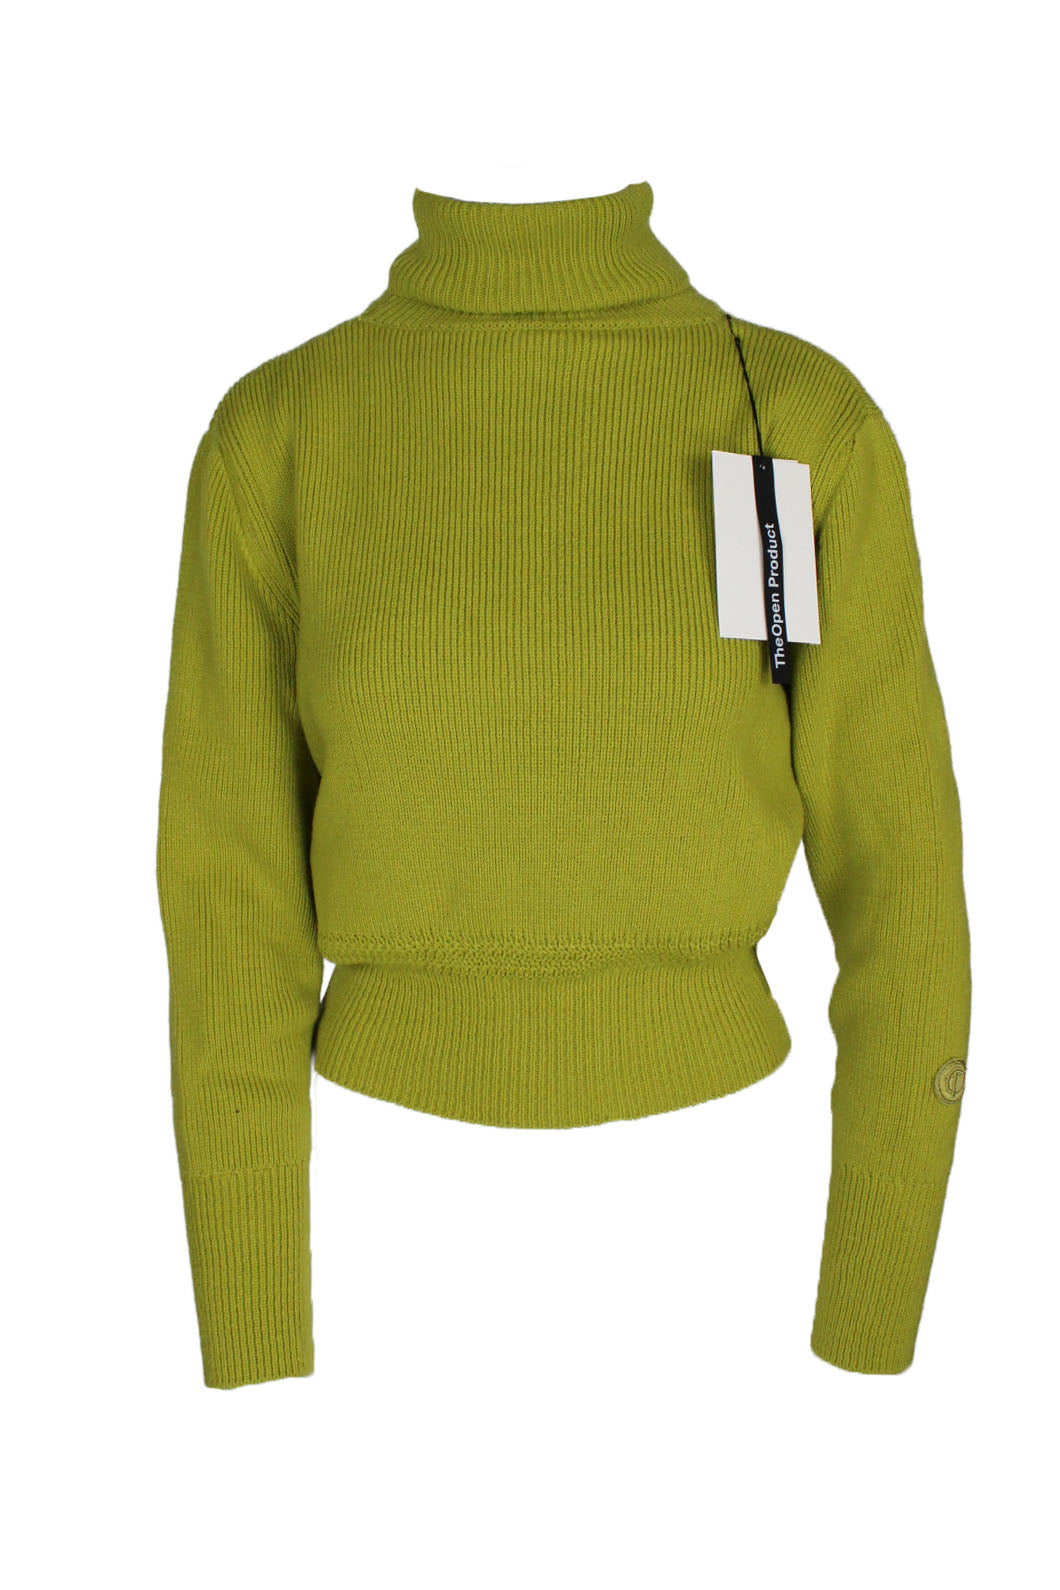  theopen product green ribbed turtleneck knit pullover. features a loose knit detail at the waist. tag attached.